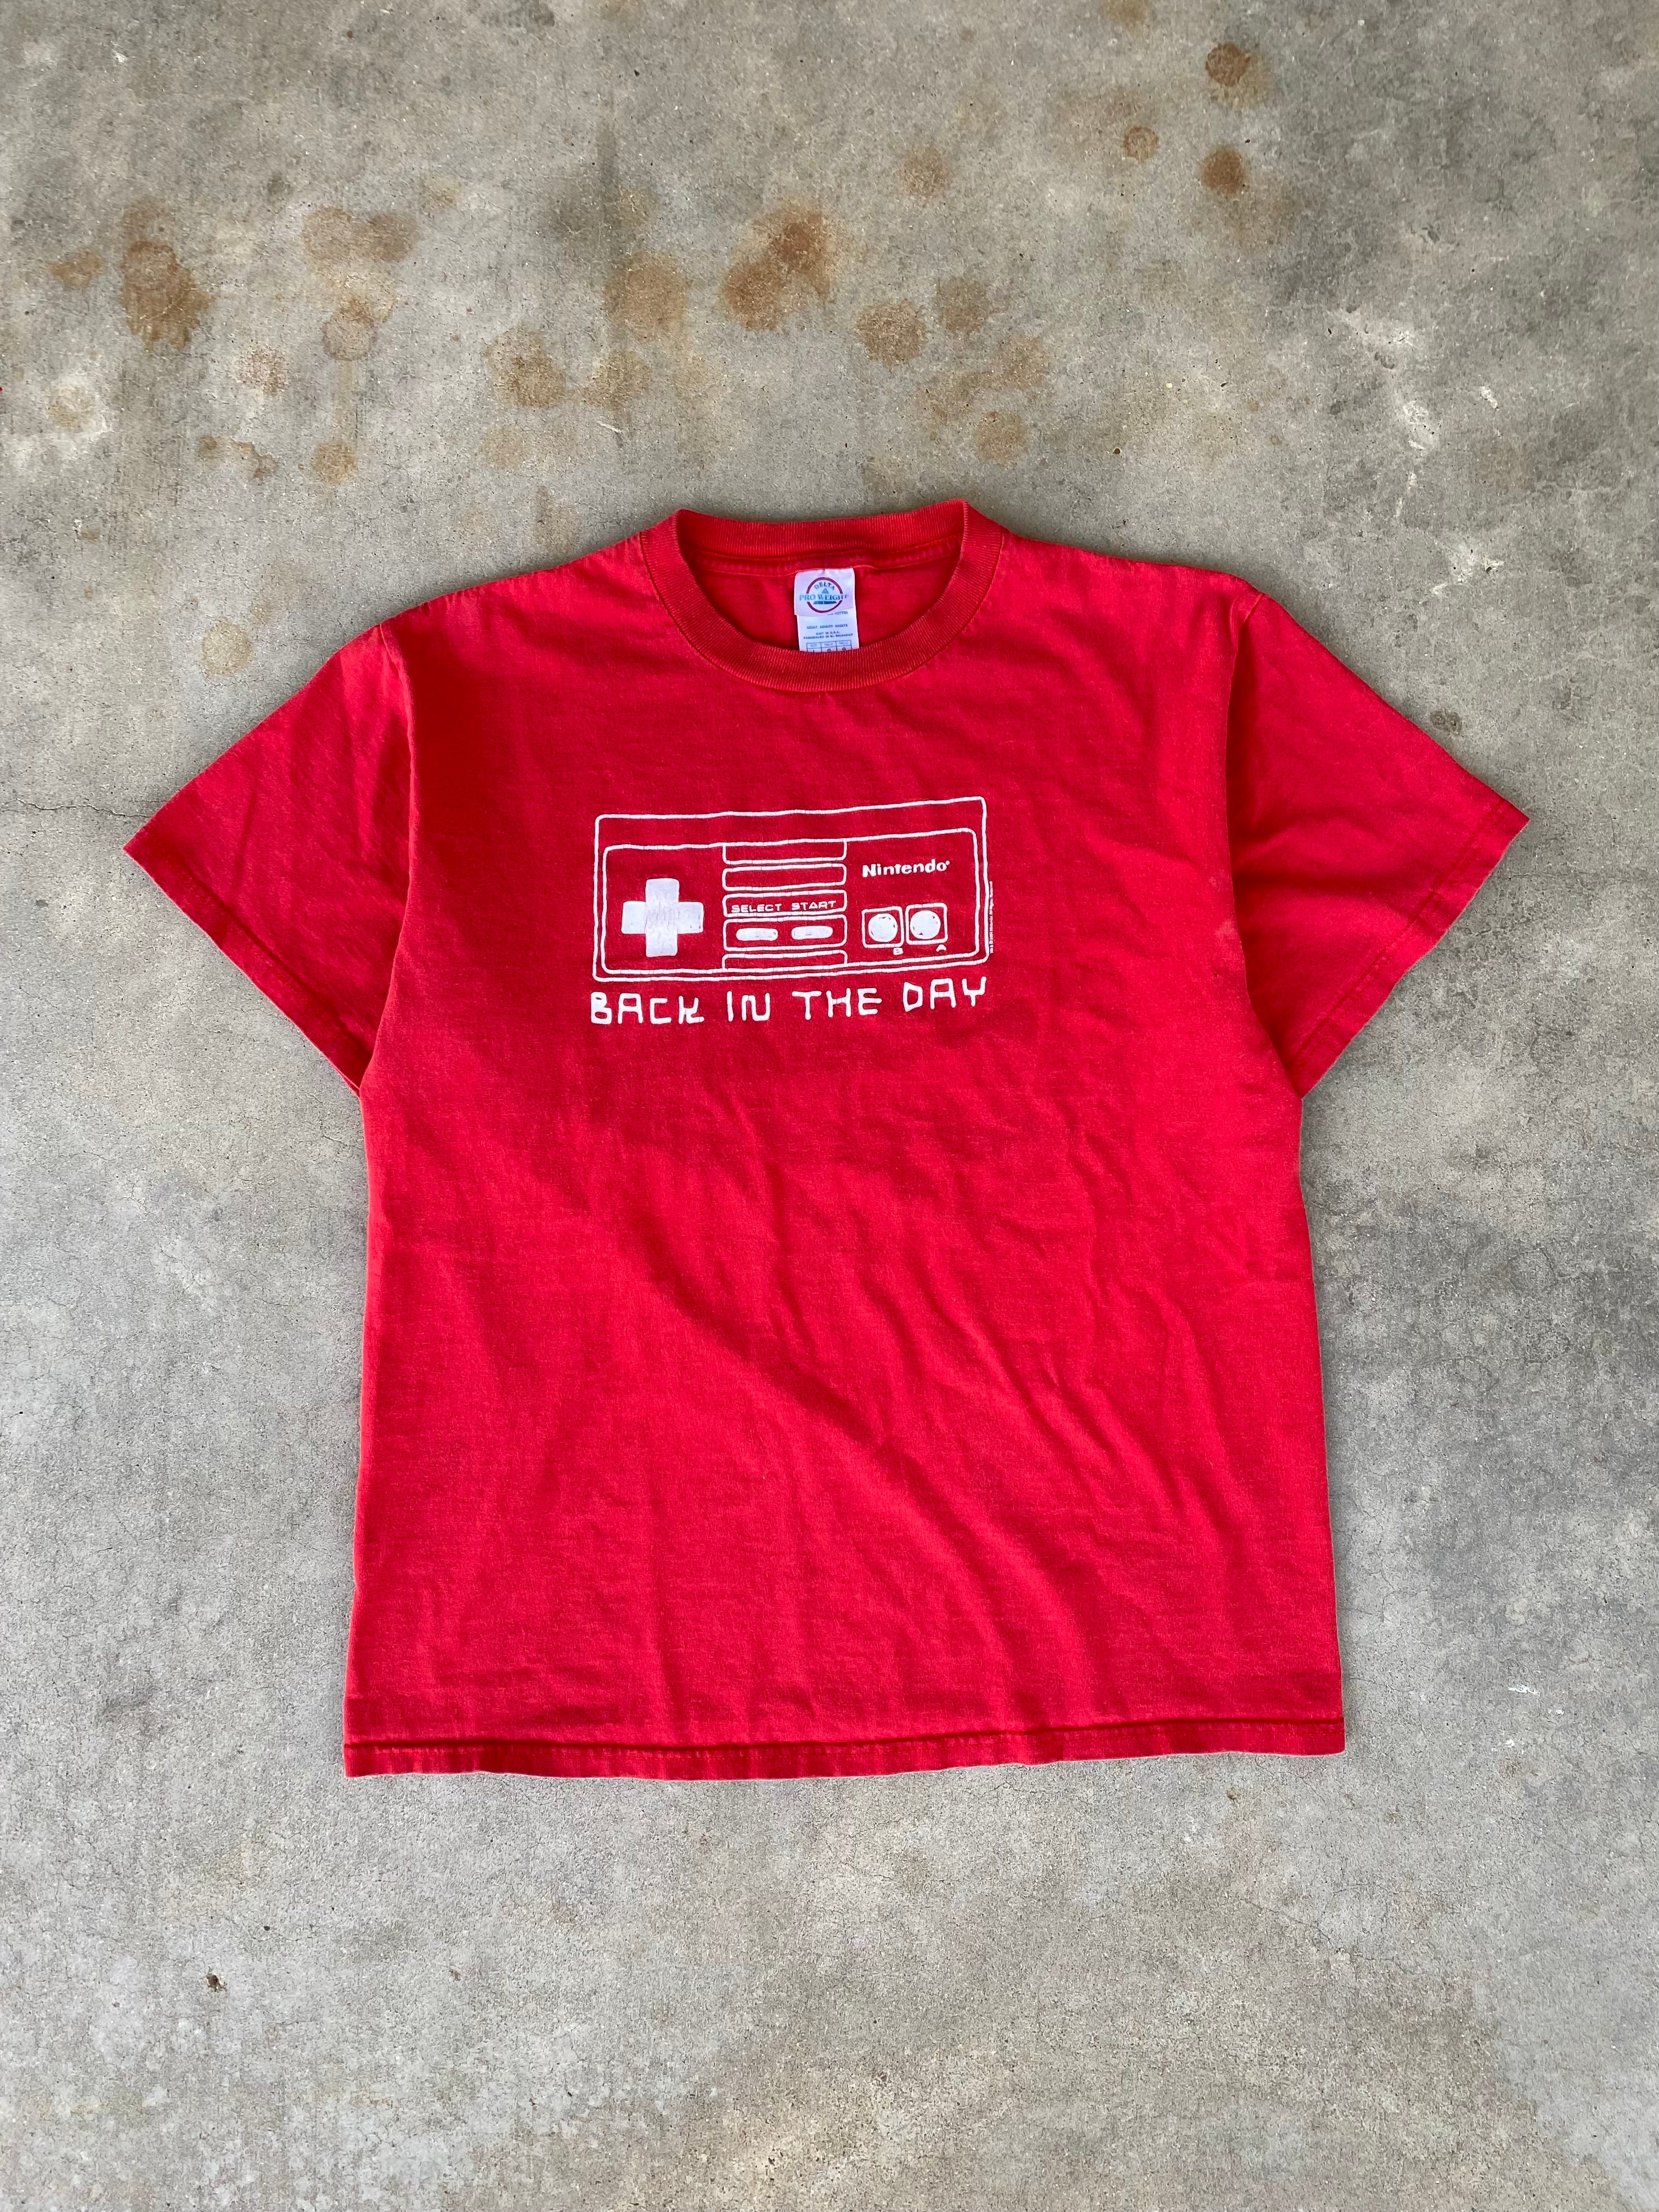 2004 Nintendo "Back in the Day" T-Shirt